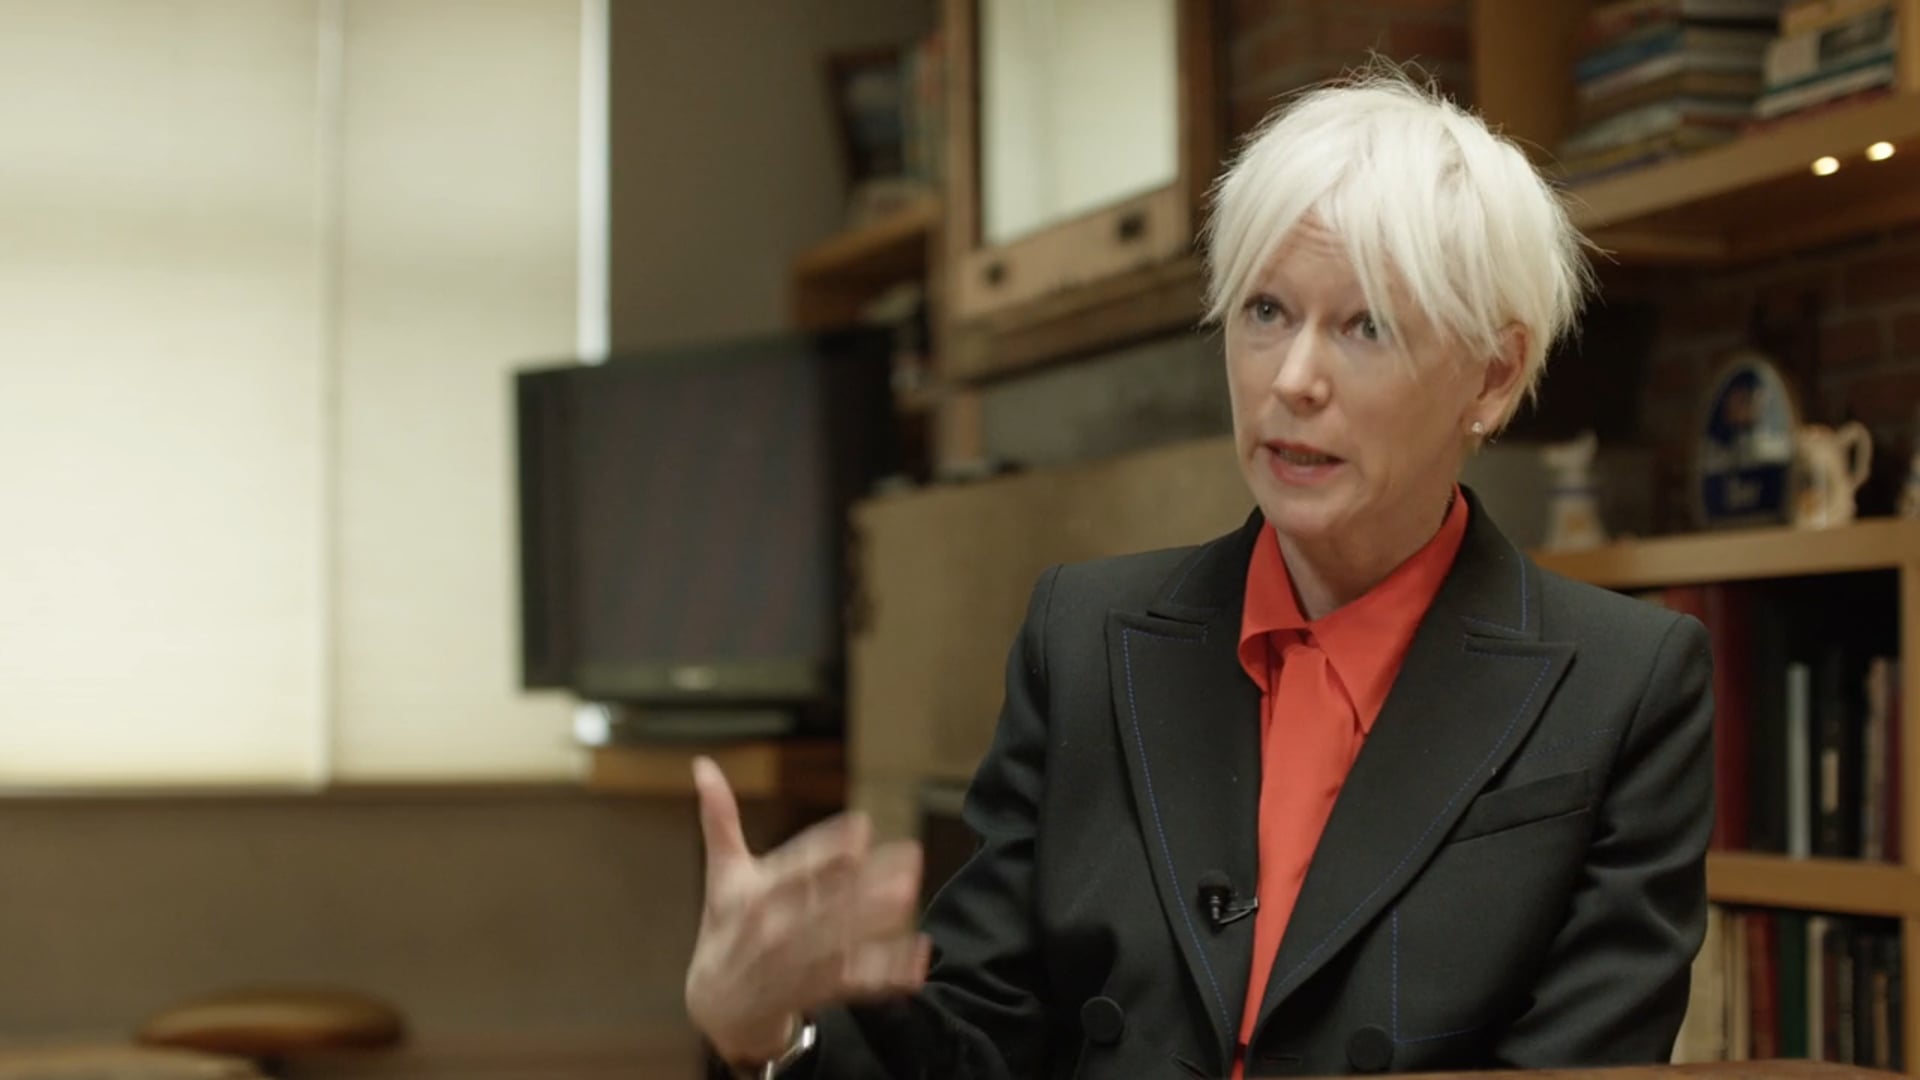 What Moves You?: Joanna Coles